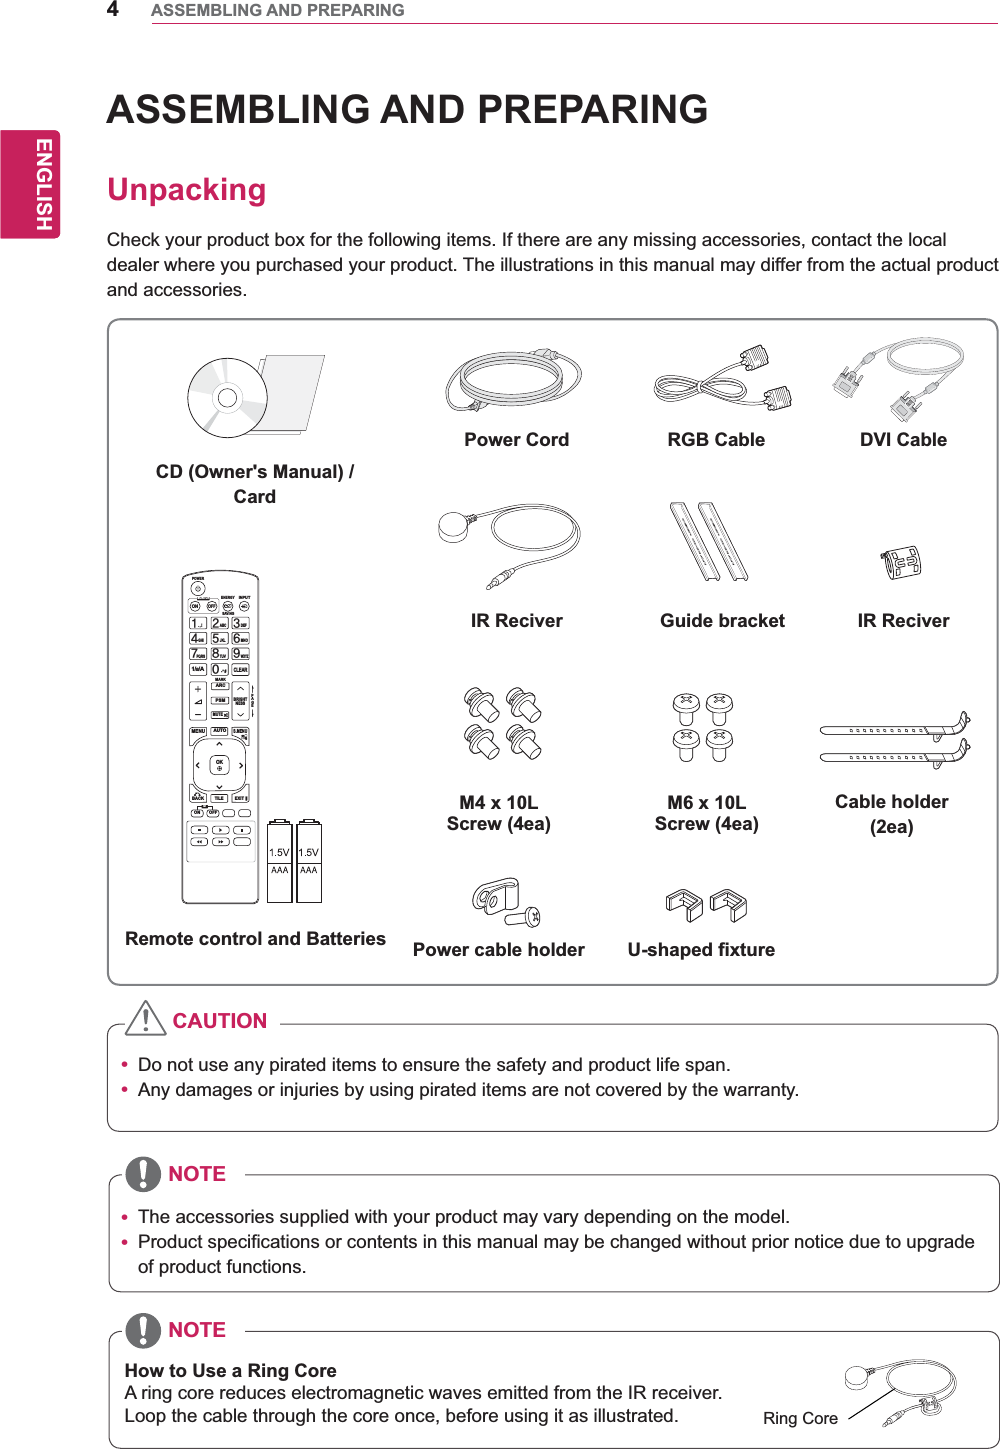 4ENGENGLISHASSEMBLING AND PREPARINGASSEMBLING AND PREPARINGUnpackingCheck your product box for the following items. If there are any missing accessories, contact the local dealer where you purchased your product. The illustrations in this manual may differ from the actual product and accessories.y Do not use any pirated items to ensure the safety and product life span.y Any damages or injuries by using pirated items are not covered by the warranty. y The accessories supplied with your product may vary depending on the model.y Product specifications or contents in this manual may be changed without prior notice due to upgrade of product functions.CAUTIONNOTENOTEPAGEINPUTENERGYSAVINGMARKARCONOFF. , !ABCDEFGHIJKLMNOPQRSTUV1/a/A- * #WXYZCLEARMONITORPSMAUTOMUTEBRIGHTNESSMENUPOWEROKS.MENUIDBACK TILEON OFFEXITRemote control and BatteriesPower Cord DVI CableIR Reciver Guide bracketM4 x 10L Screw (4ea)Power cable holder U-shaped fixtureM6 x 10L Screw (4ea)IR ReciverCable holder(2ea)CD (Owner&apos;s Manual) /CardRGB CableHow to Use a Ring CoreA ring core reduces electromagnetic waves emitted from the IR receiver.Loop the cable through the core once, before using it as illustrated. Ring Core